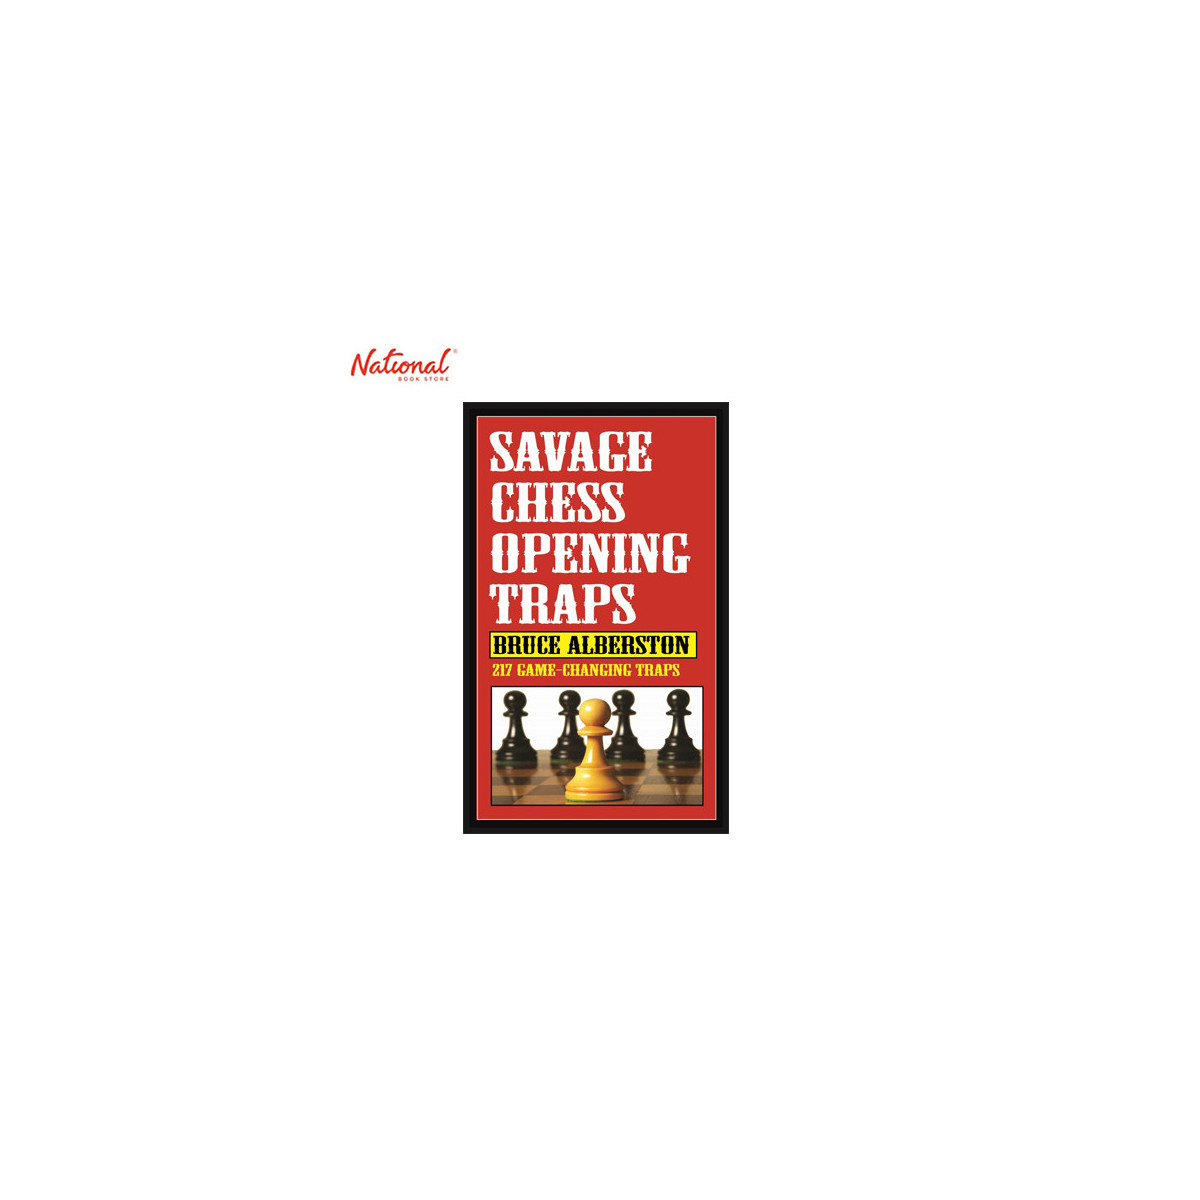 Savage Chess Openings Traps, Book by Bruce Alberston